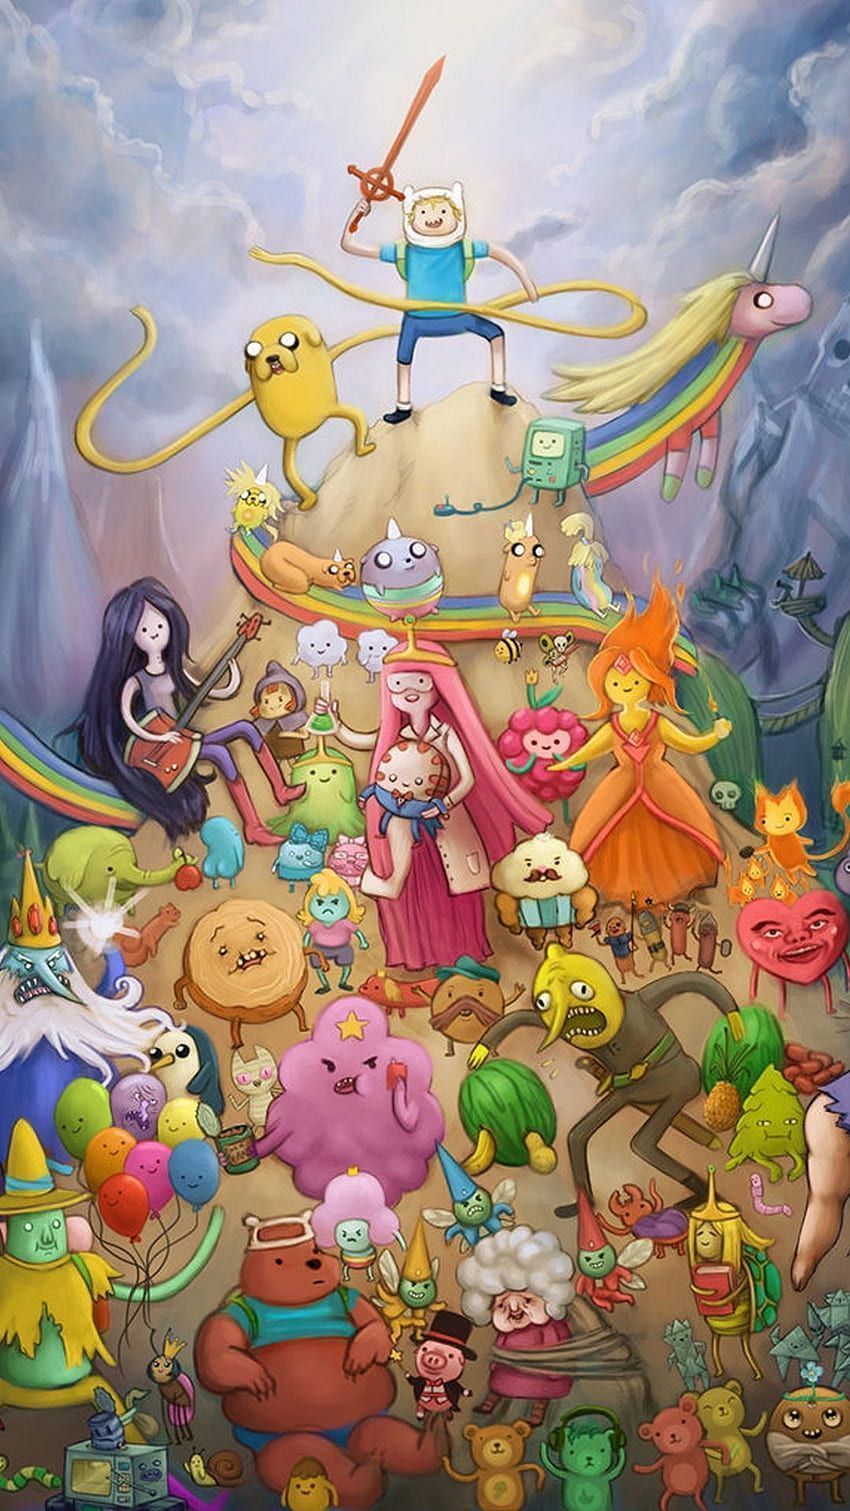 Adventure Time wallpaper for iPhone and Android devices - Adventure Time